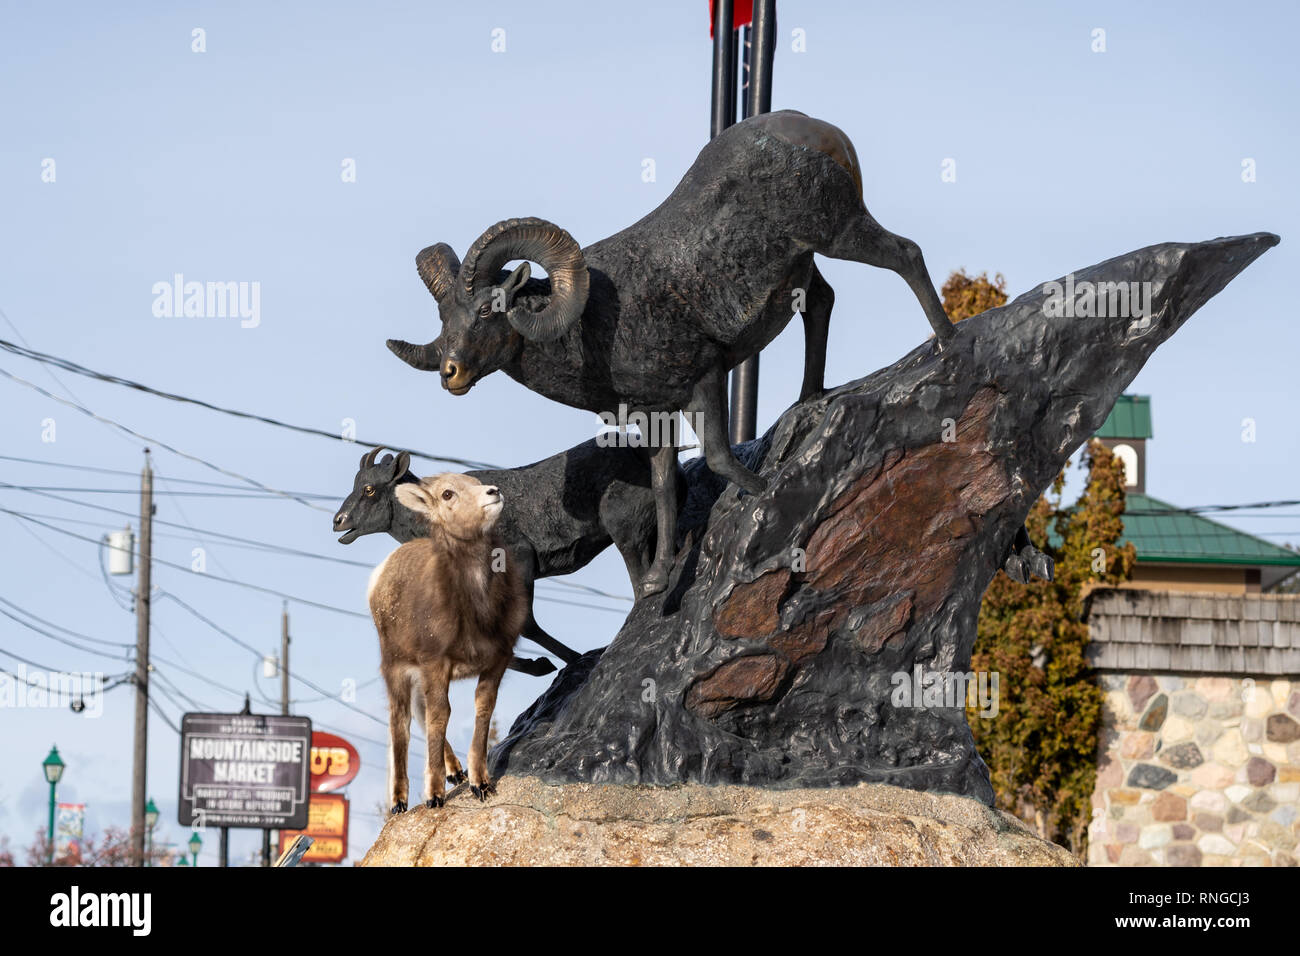 Radium Hot Springs, British Columbia, Canada - Janurary 20, 2019: A confused bighorn sheep baby ewe stands on top of a statue of Bighorn sheep, confus Stock Photo